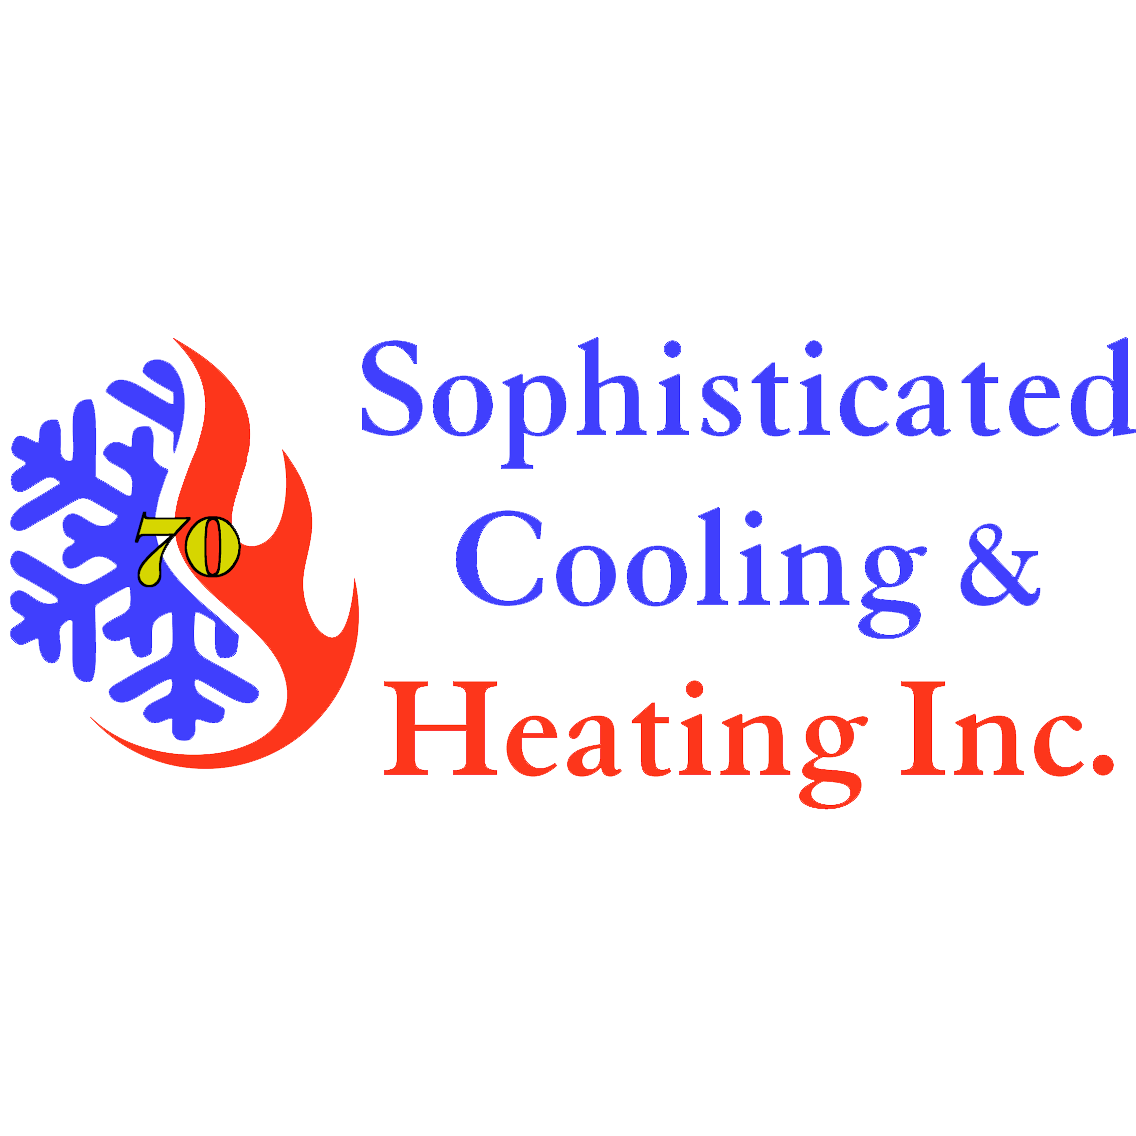 Sophisticated Cooling & Heating Inc - Port St. Lucie, FL - (772)207-9909 | ShowMeLocal.com